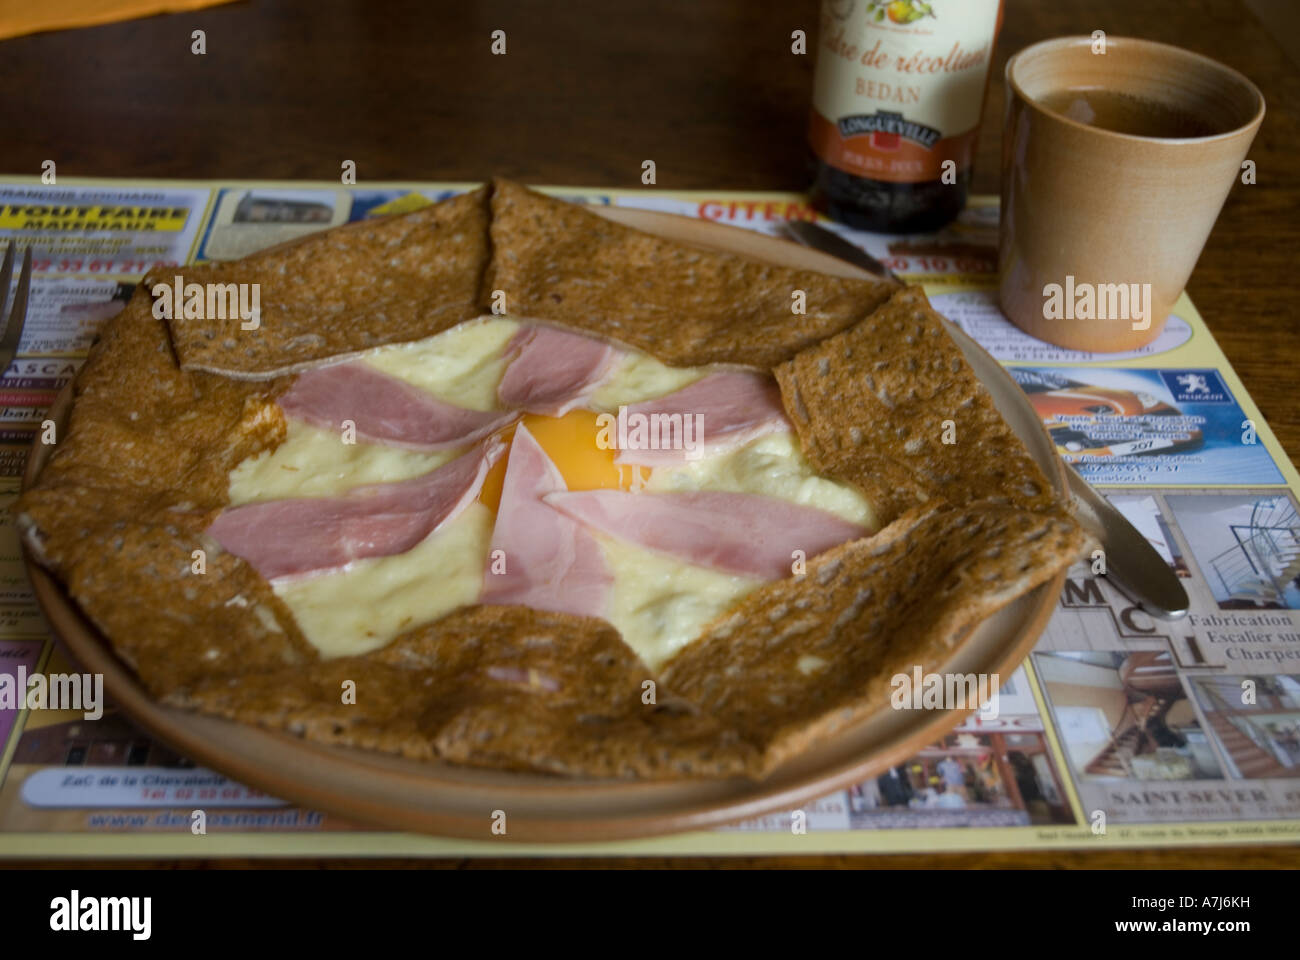 A 'gallette', a French savoury pancake, with a cup of cider. This is a 'complet' with ham egg and cheese Stock Photo